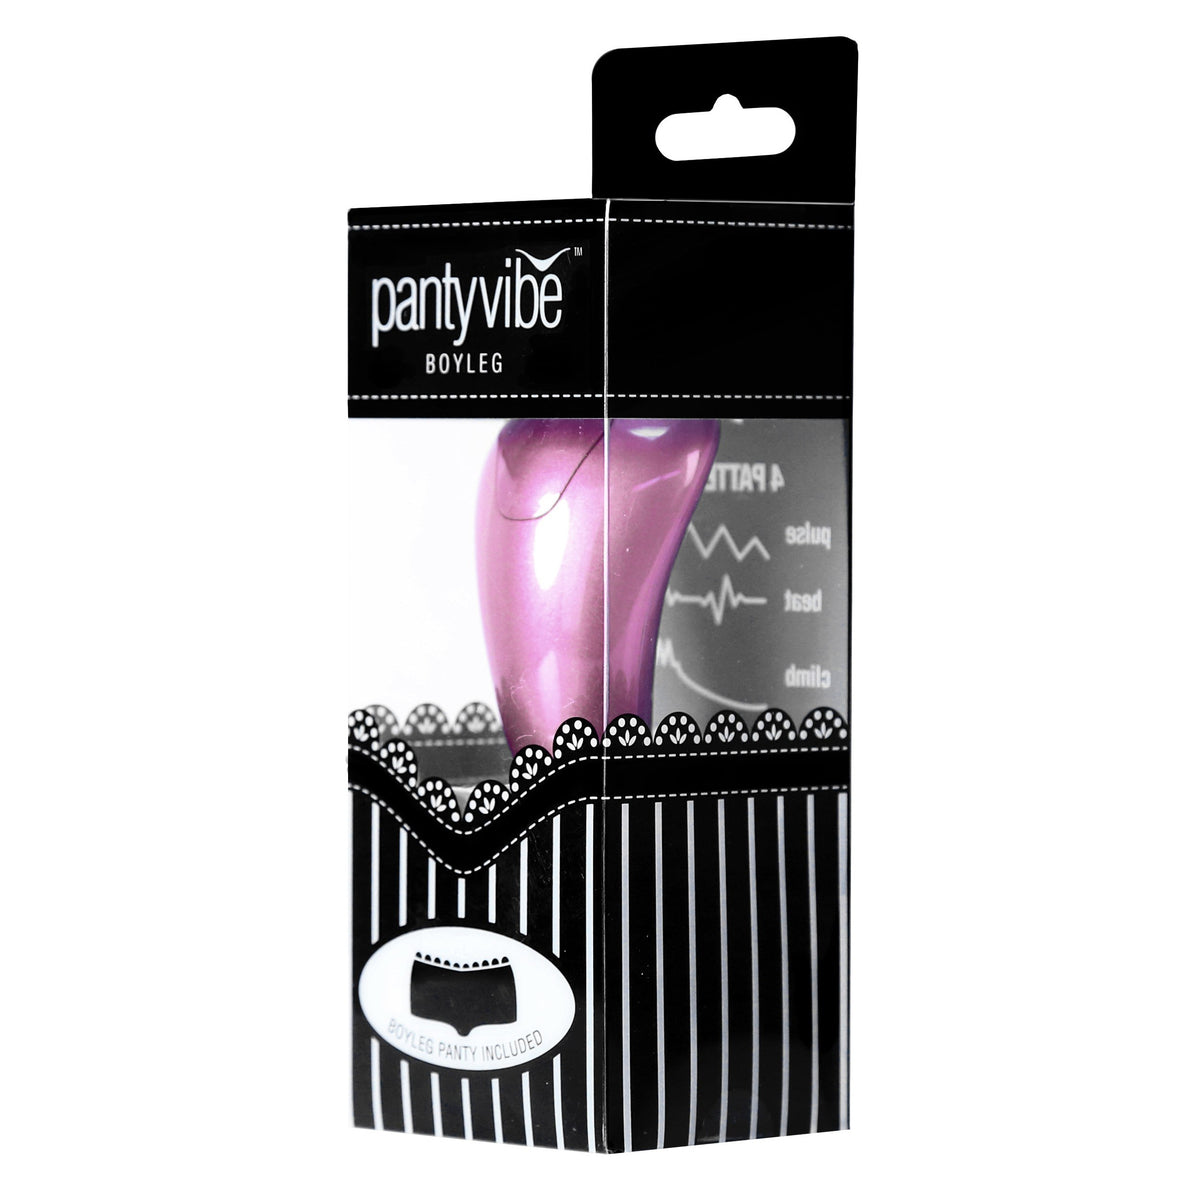 BMS - Panty Vibrator - Battery Operated - Pink - XL